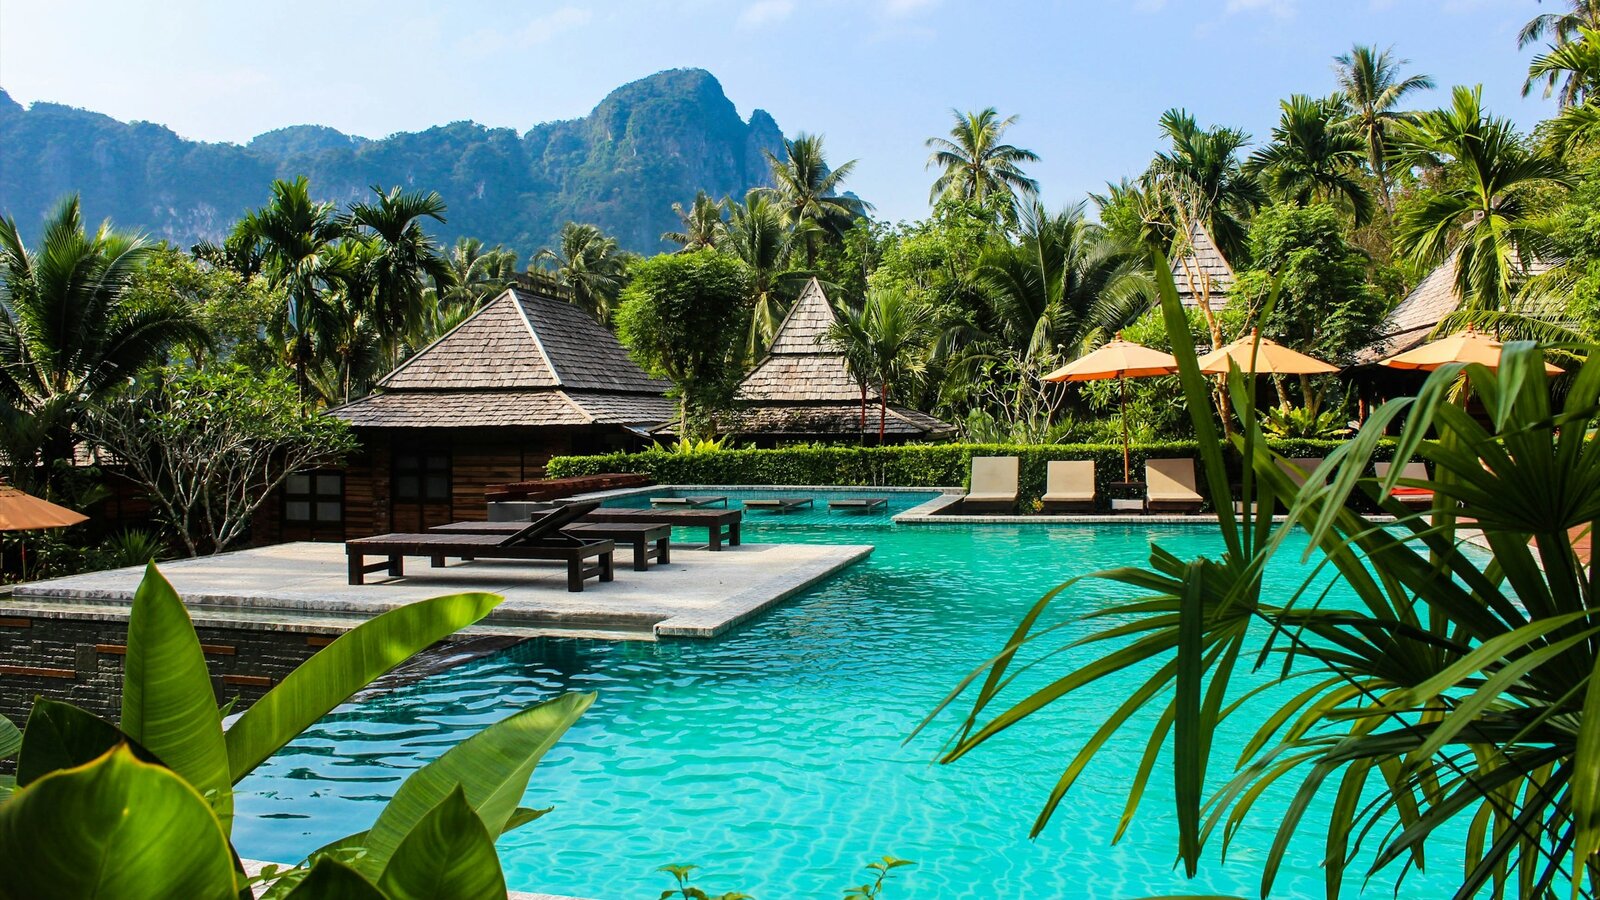 Investing in Real Estate in Thailand: Where to Invest and How Much Money You Can Make